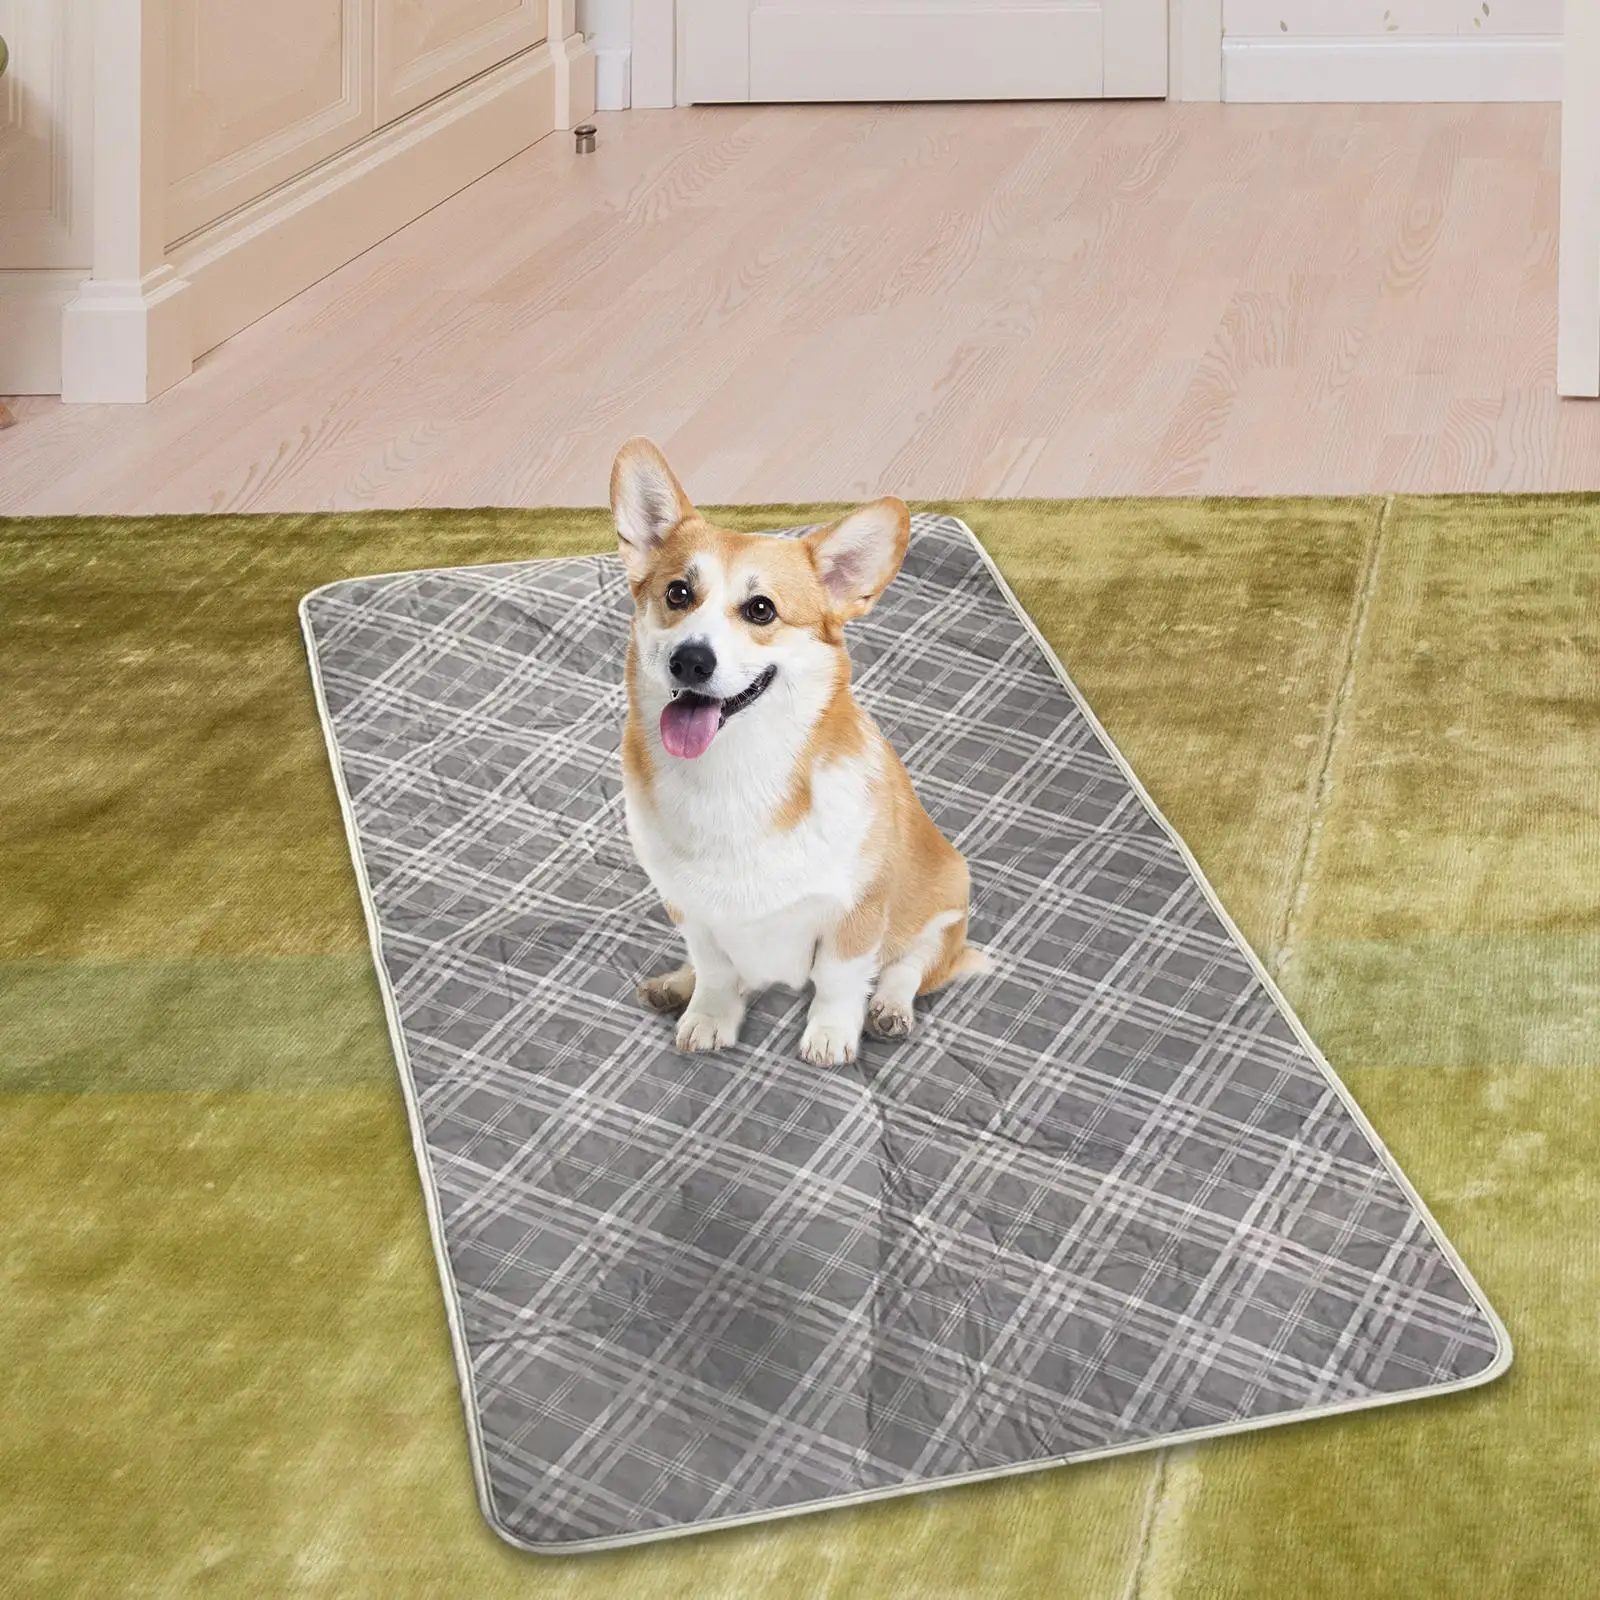 Pet Dog Pee Pad Cat Mat Puppy Kitten Absorbent Pad Reusable Blanket Bed for Kennel Crate Playpen Home Travel Cage Supplies